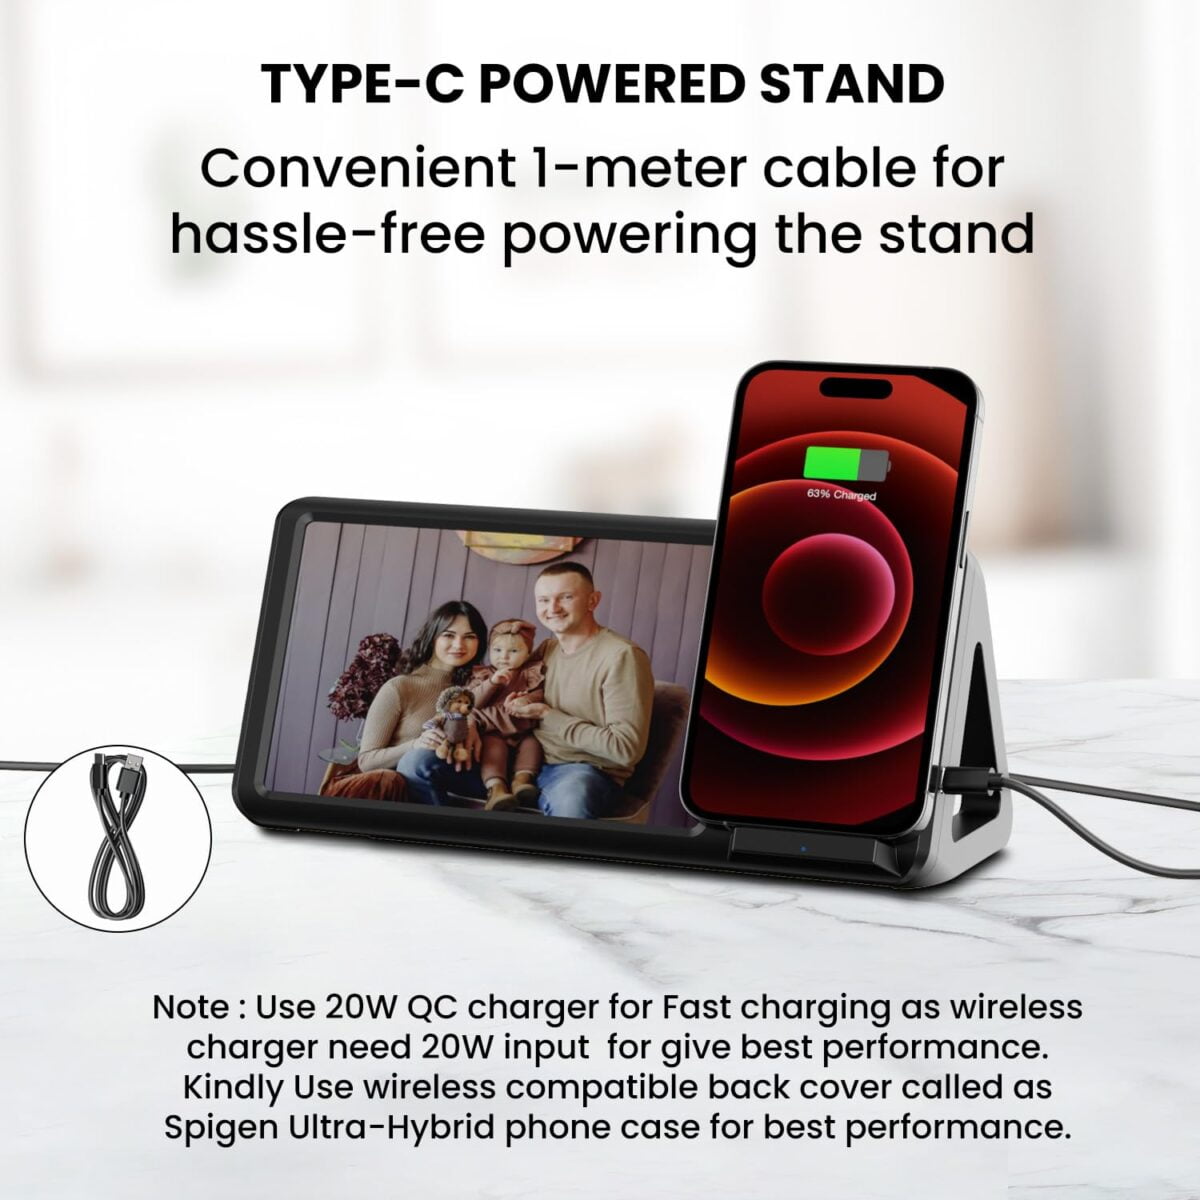 Portronics freedom 5 qi enable charger with photo frame 6 portronics freedom 5 qi enable charger with photo frame